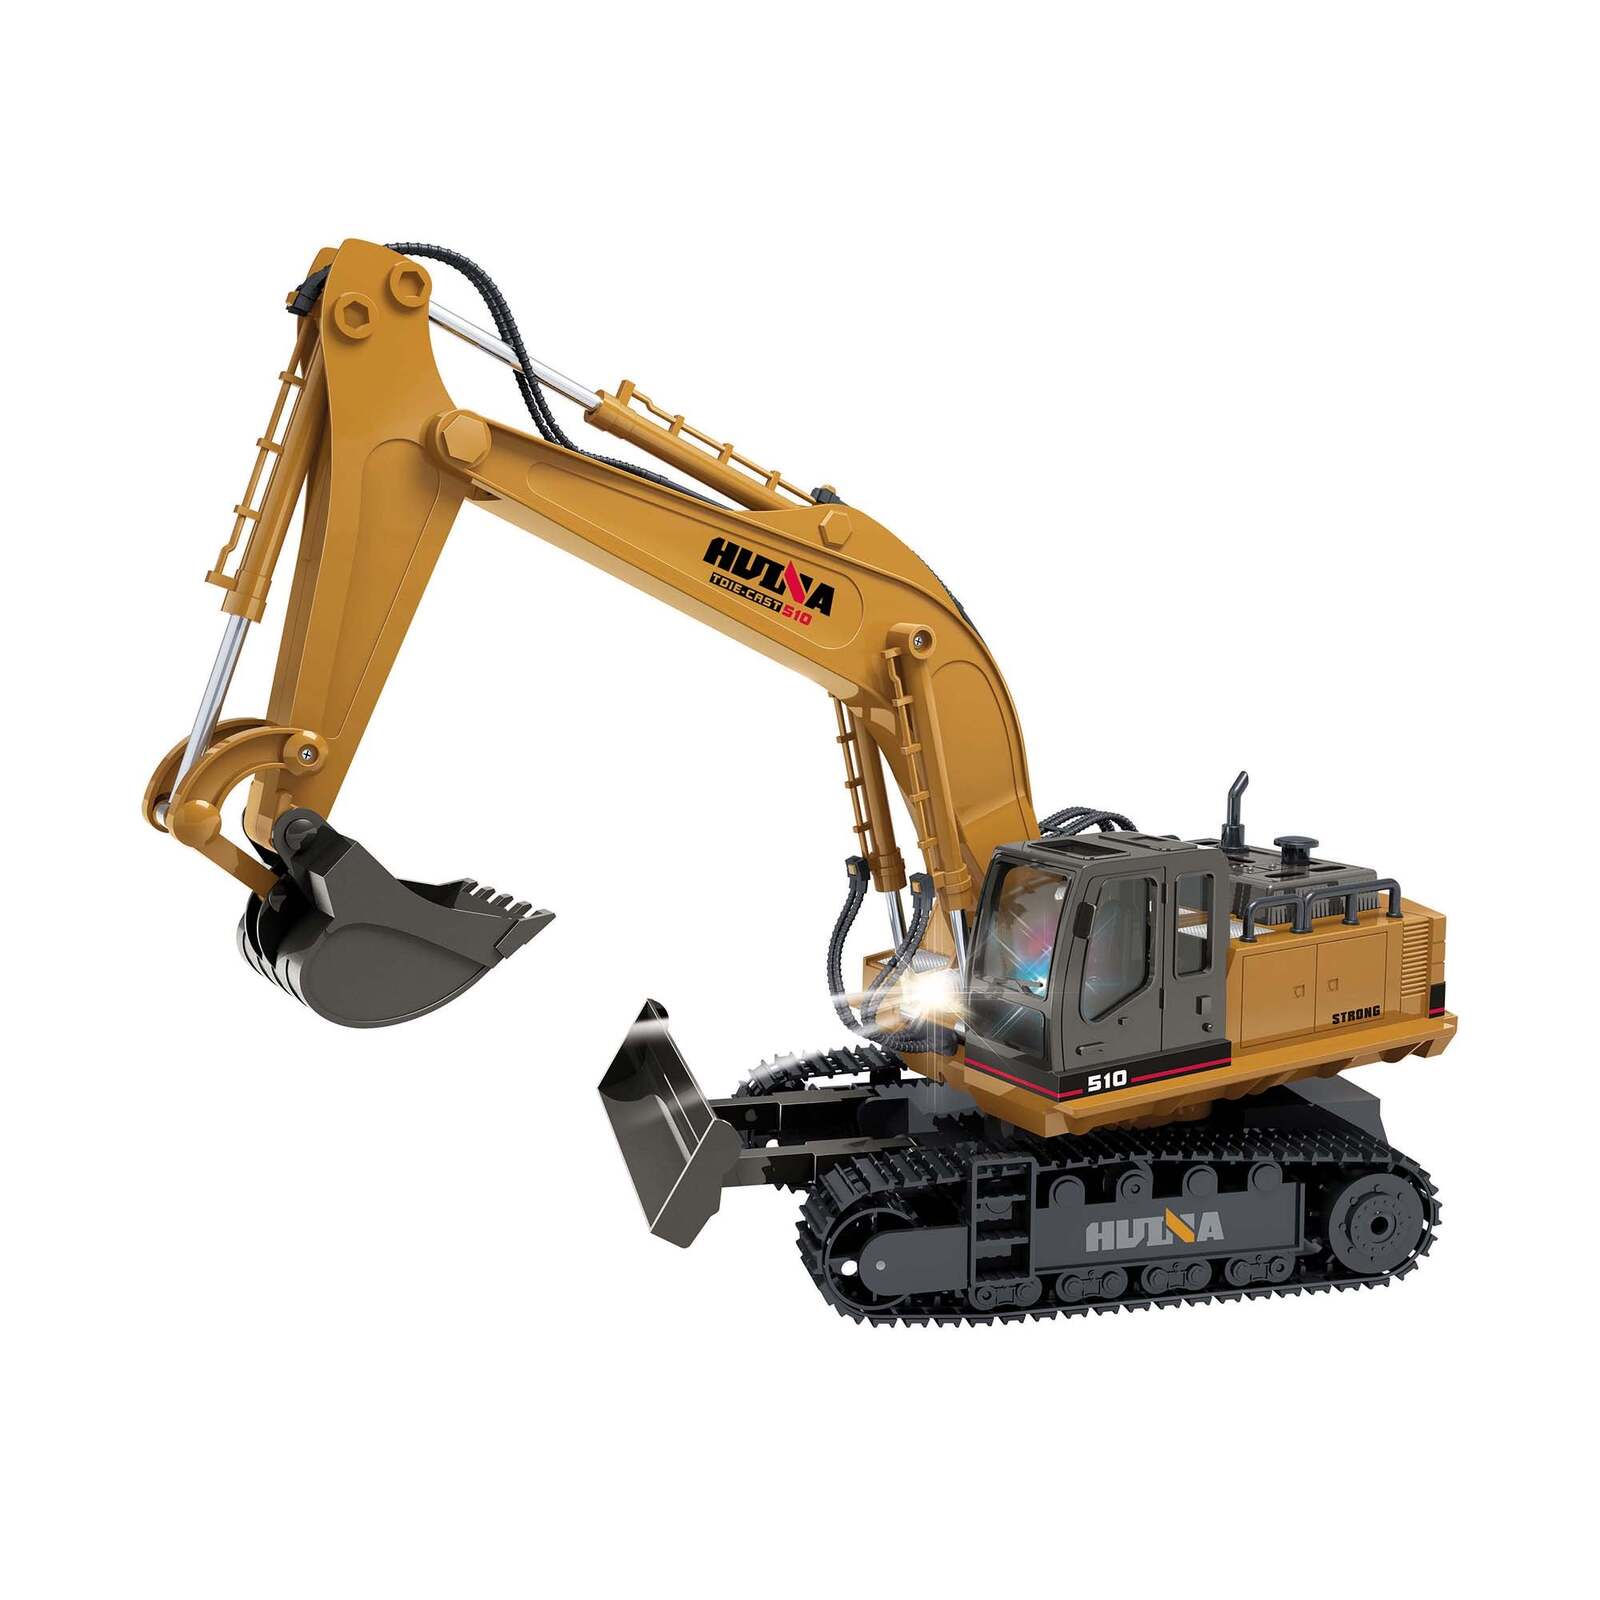 Lenoxx Remote Controlled 2.4GHz Tractor Excavator Digger Toy for Children